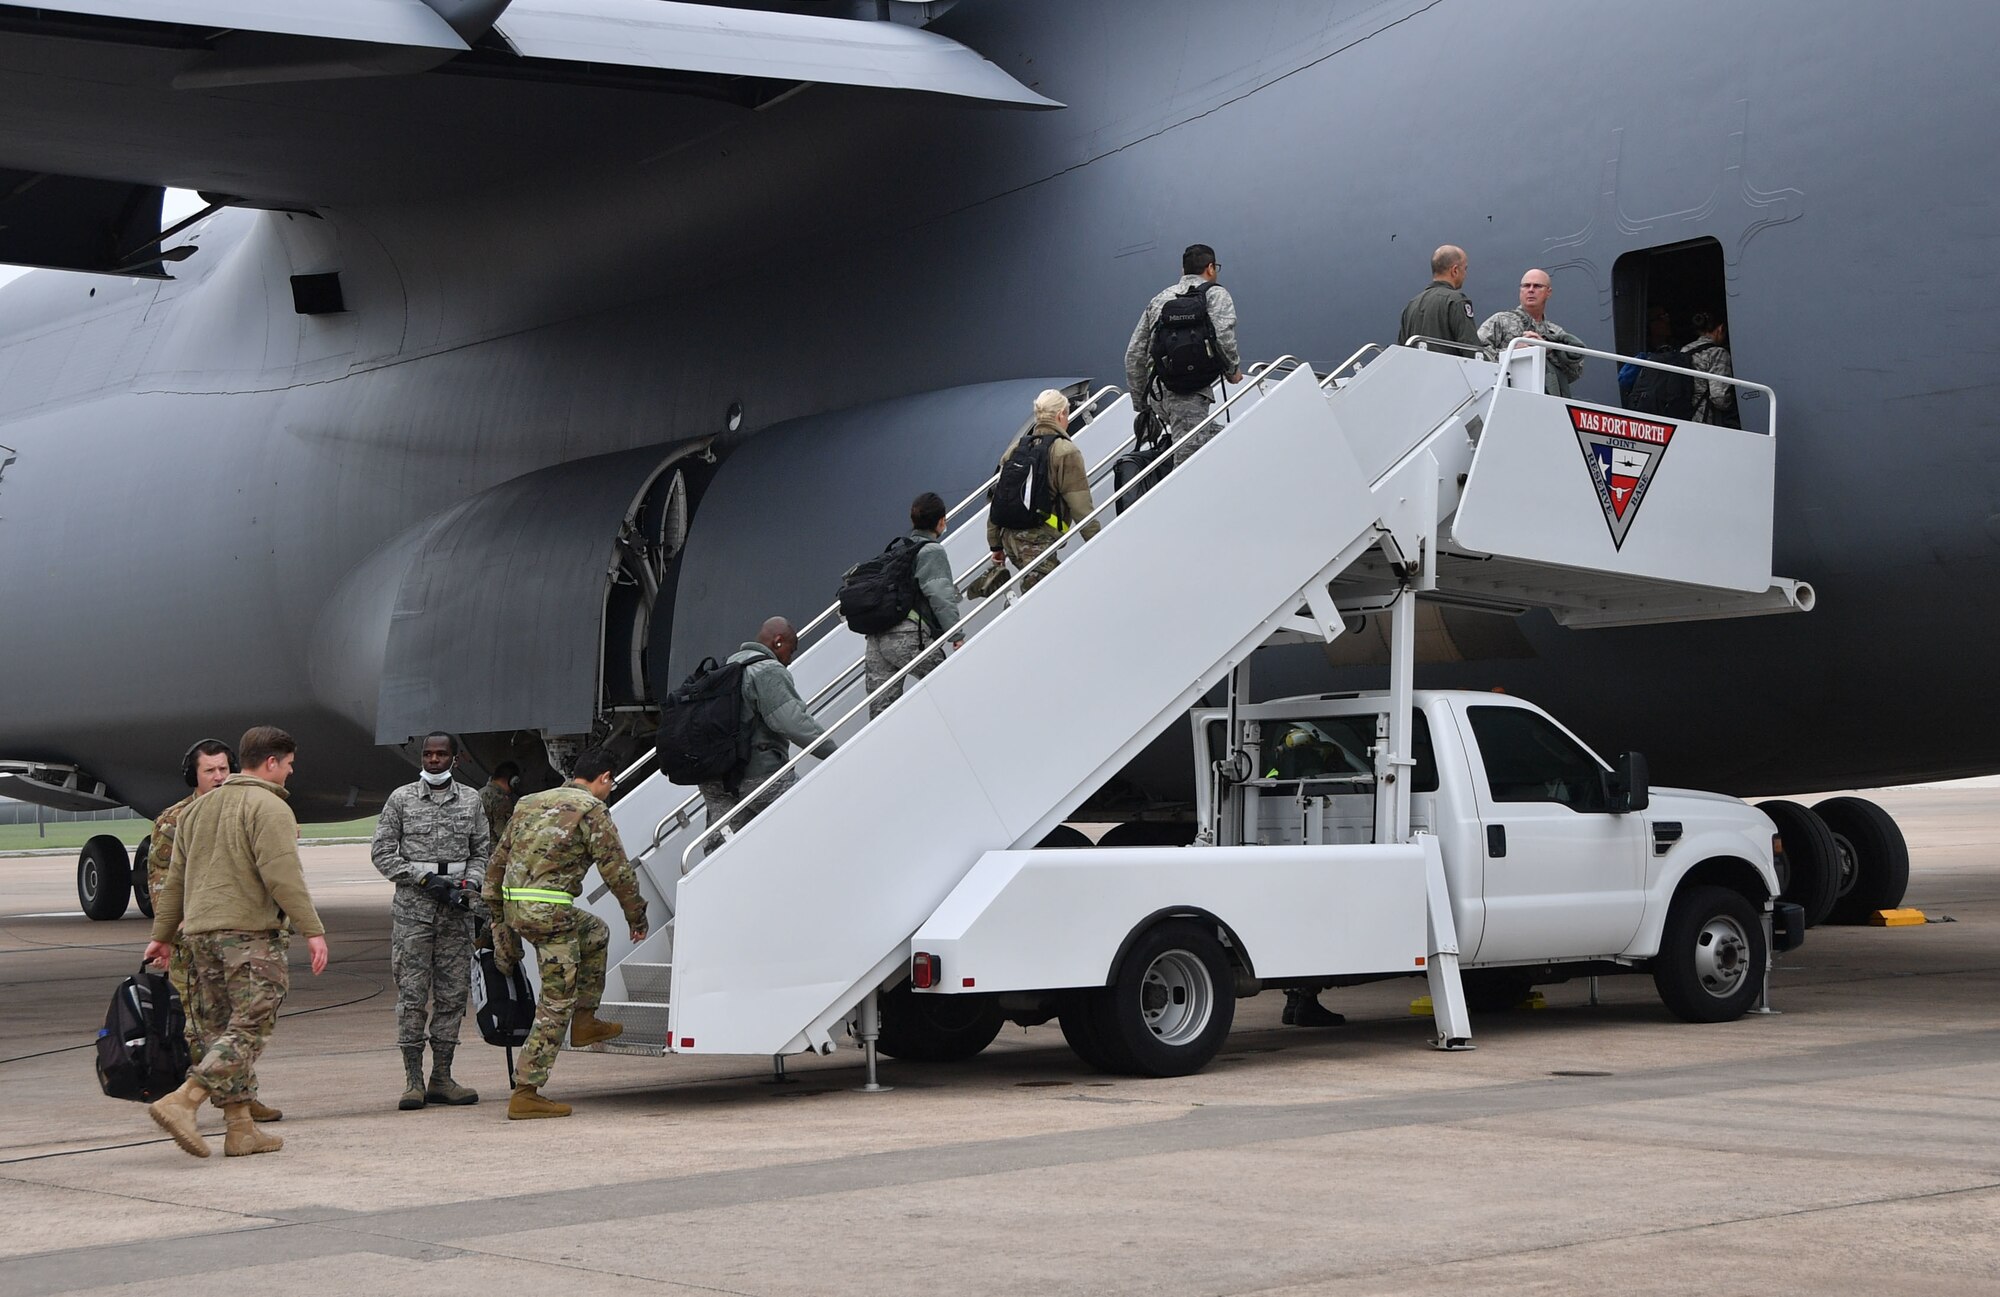 Deploying Airmen from the 301st Fighter Wing Medical Squadron board a C-5M Super Galaxy at U.S. Naval Air Station Joint Reserve Base, Fort Worth, Texas on April 5, 2020. This deployment is part of a larger mobilization package of more than 120 doctors, nurses, and respiratory technicians Air Force Reserve units across the nation provided over the past 48 hours of COVID-19 response to take care of Americans. (U.S. Air Force photo by Capt. Jessica Gross)